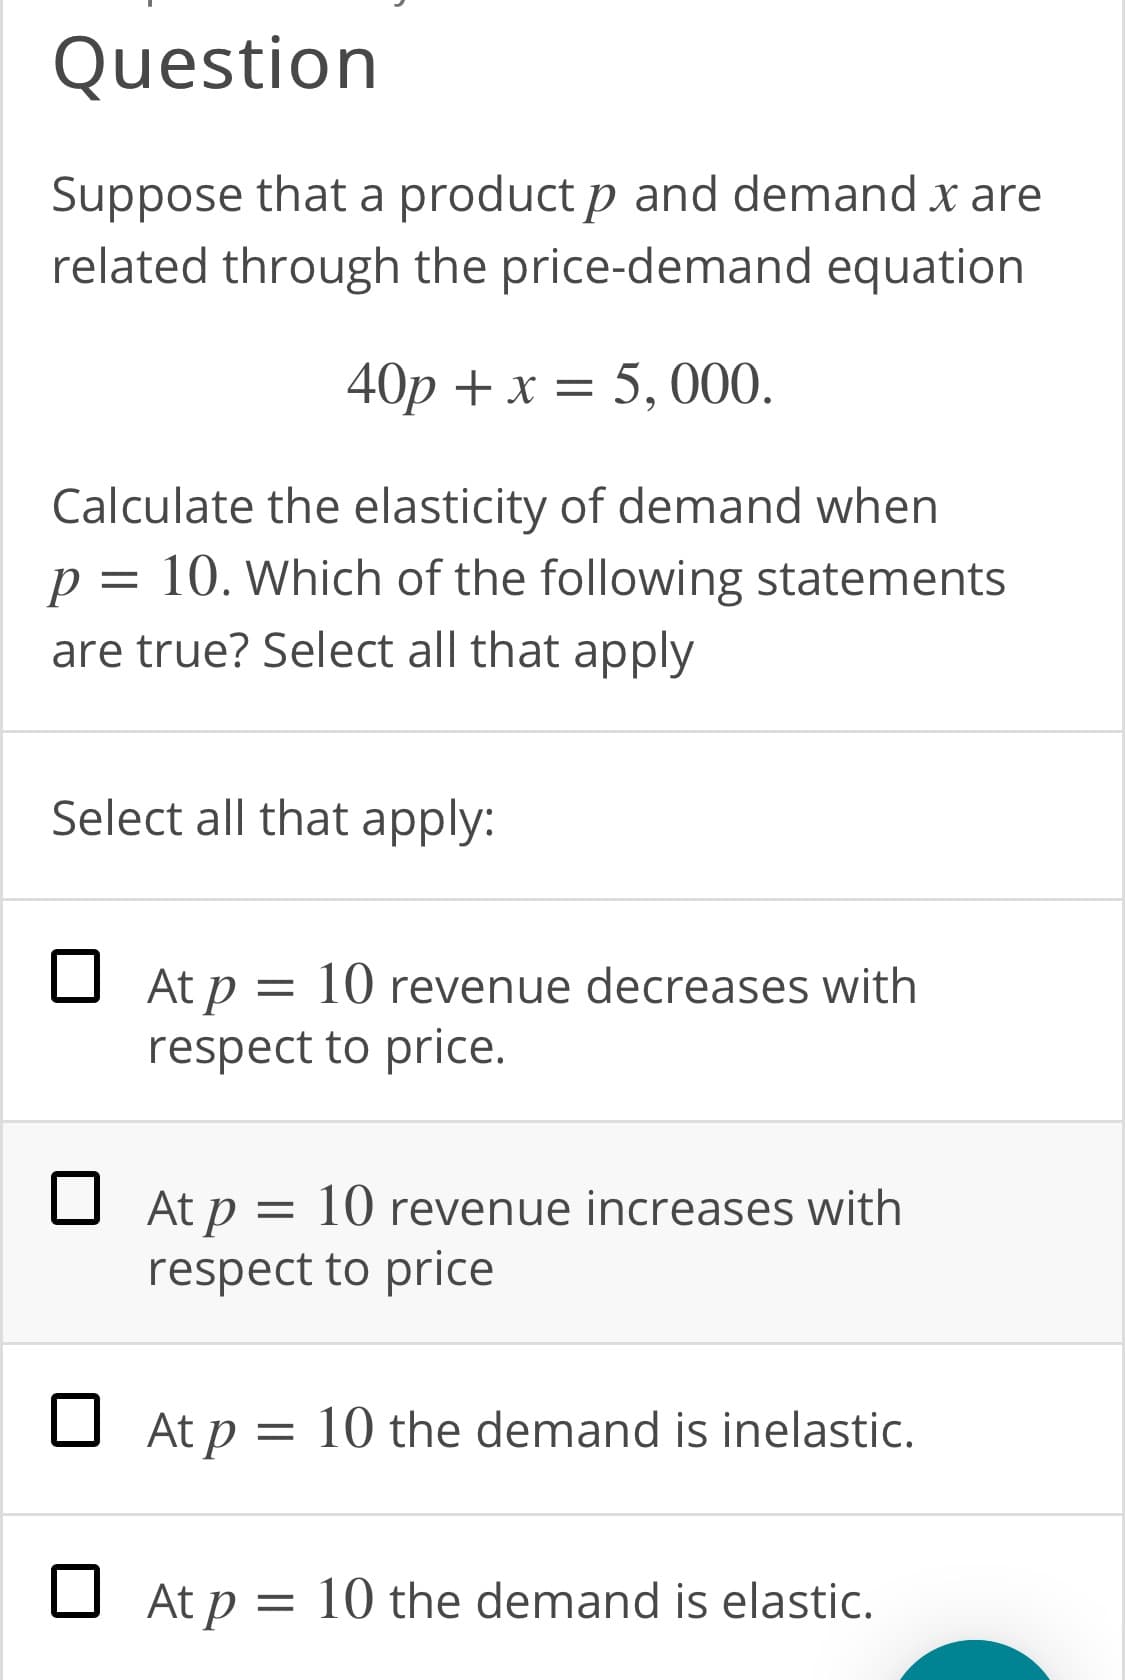 Suppose that a product p and demand x are
related through the price-demand equation
40p + x = 5, 000.
Calculate the elasticity of demand when
p = 10. Which of the following statements
are true? Select all that apply
Select all that apply:
O At p = 10 revenue decreases with
respect to price.
O At p = 10 revenue increases with
respect to price
O At p =
= 10 the demand is inelastic.
O At p = 10 the demand is elastic.
